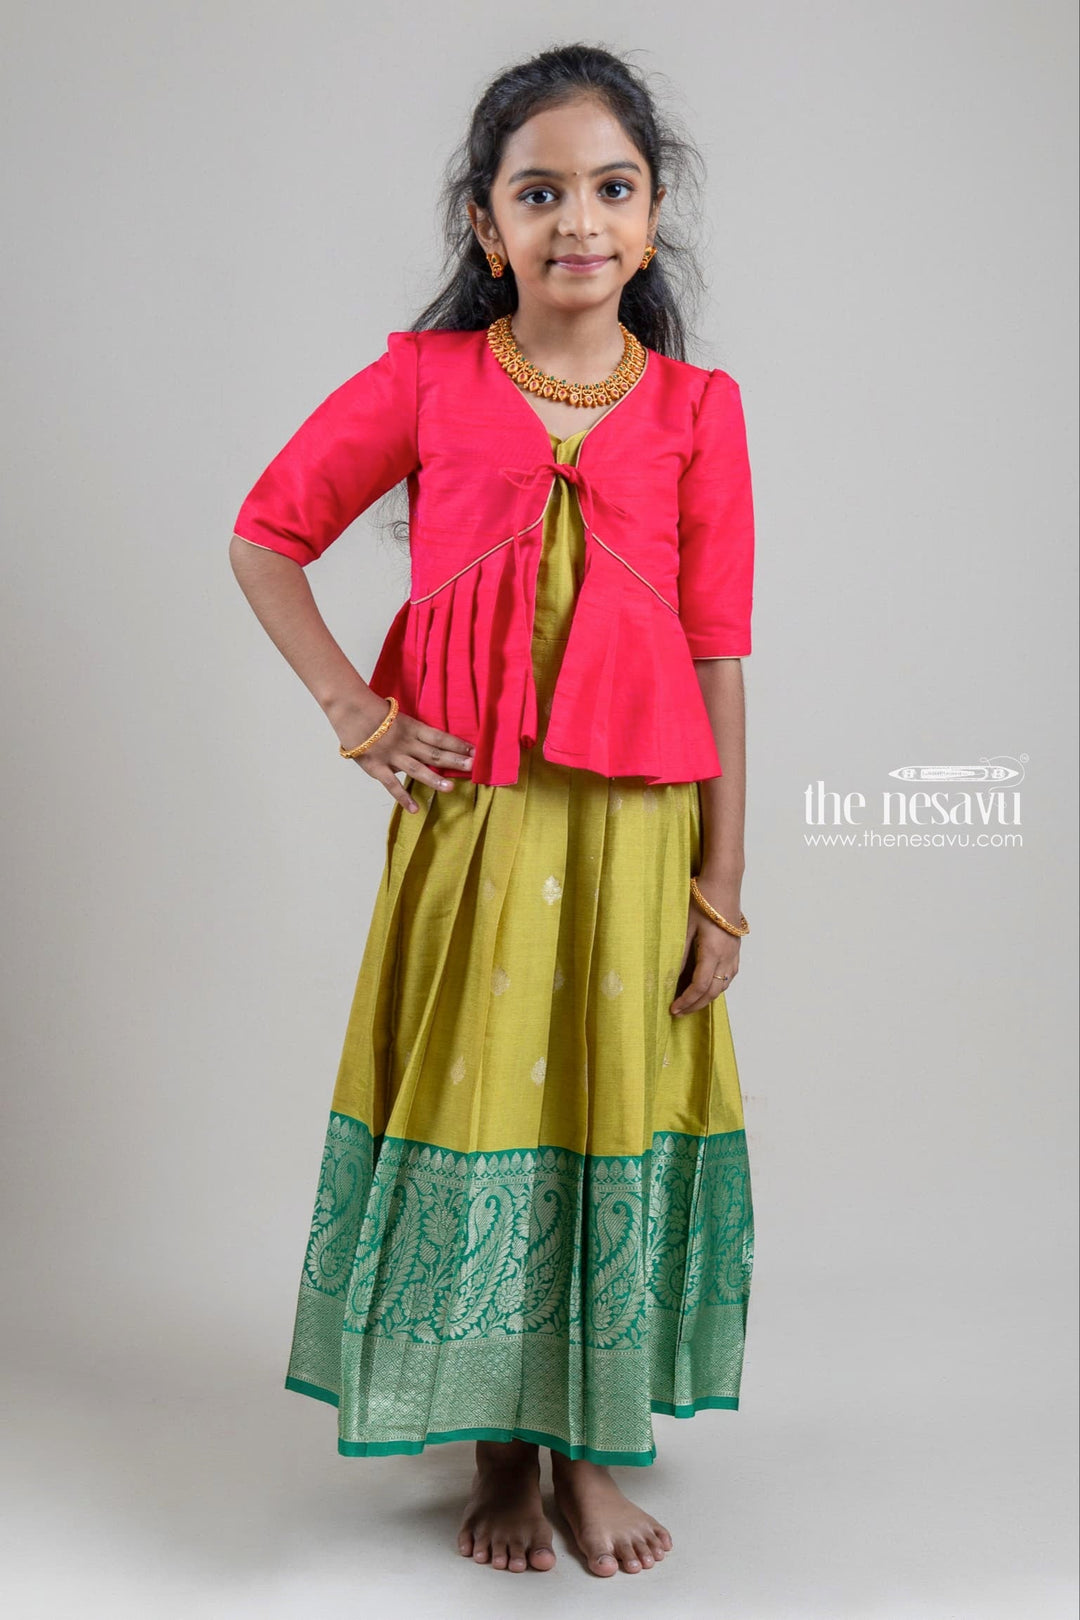 The Nesavu Silk Gown Red Silk Cotton Overcoat with Knife Pleated and Green Butta Printed Silk Cotton Gown Nesavu 14 (6M) / Green / Cotton Silk GA139A-14 Girls Casual Cotton Wear Collection | The Nesavu